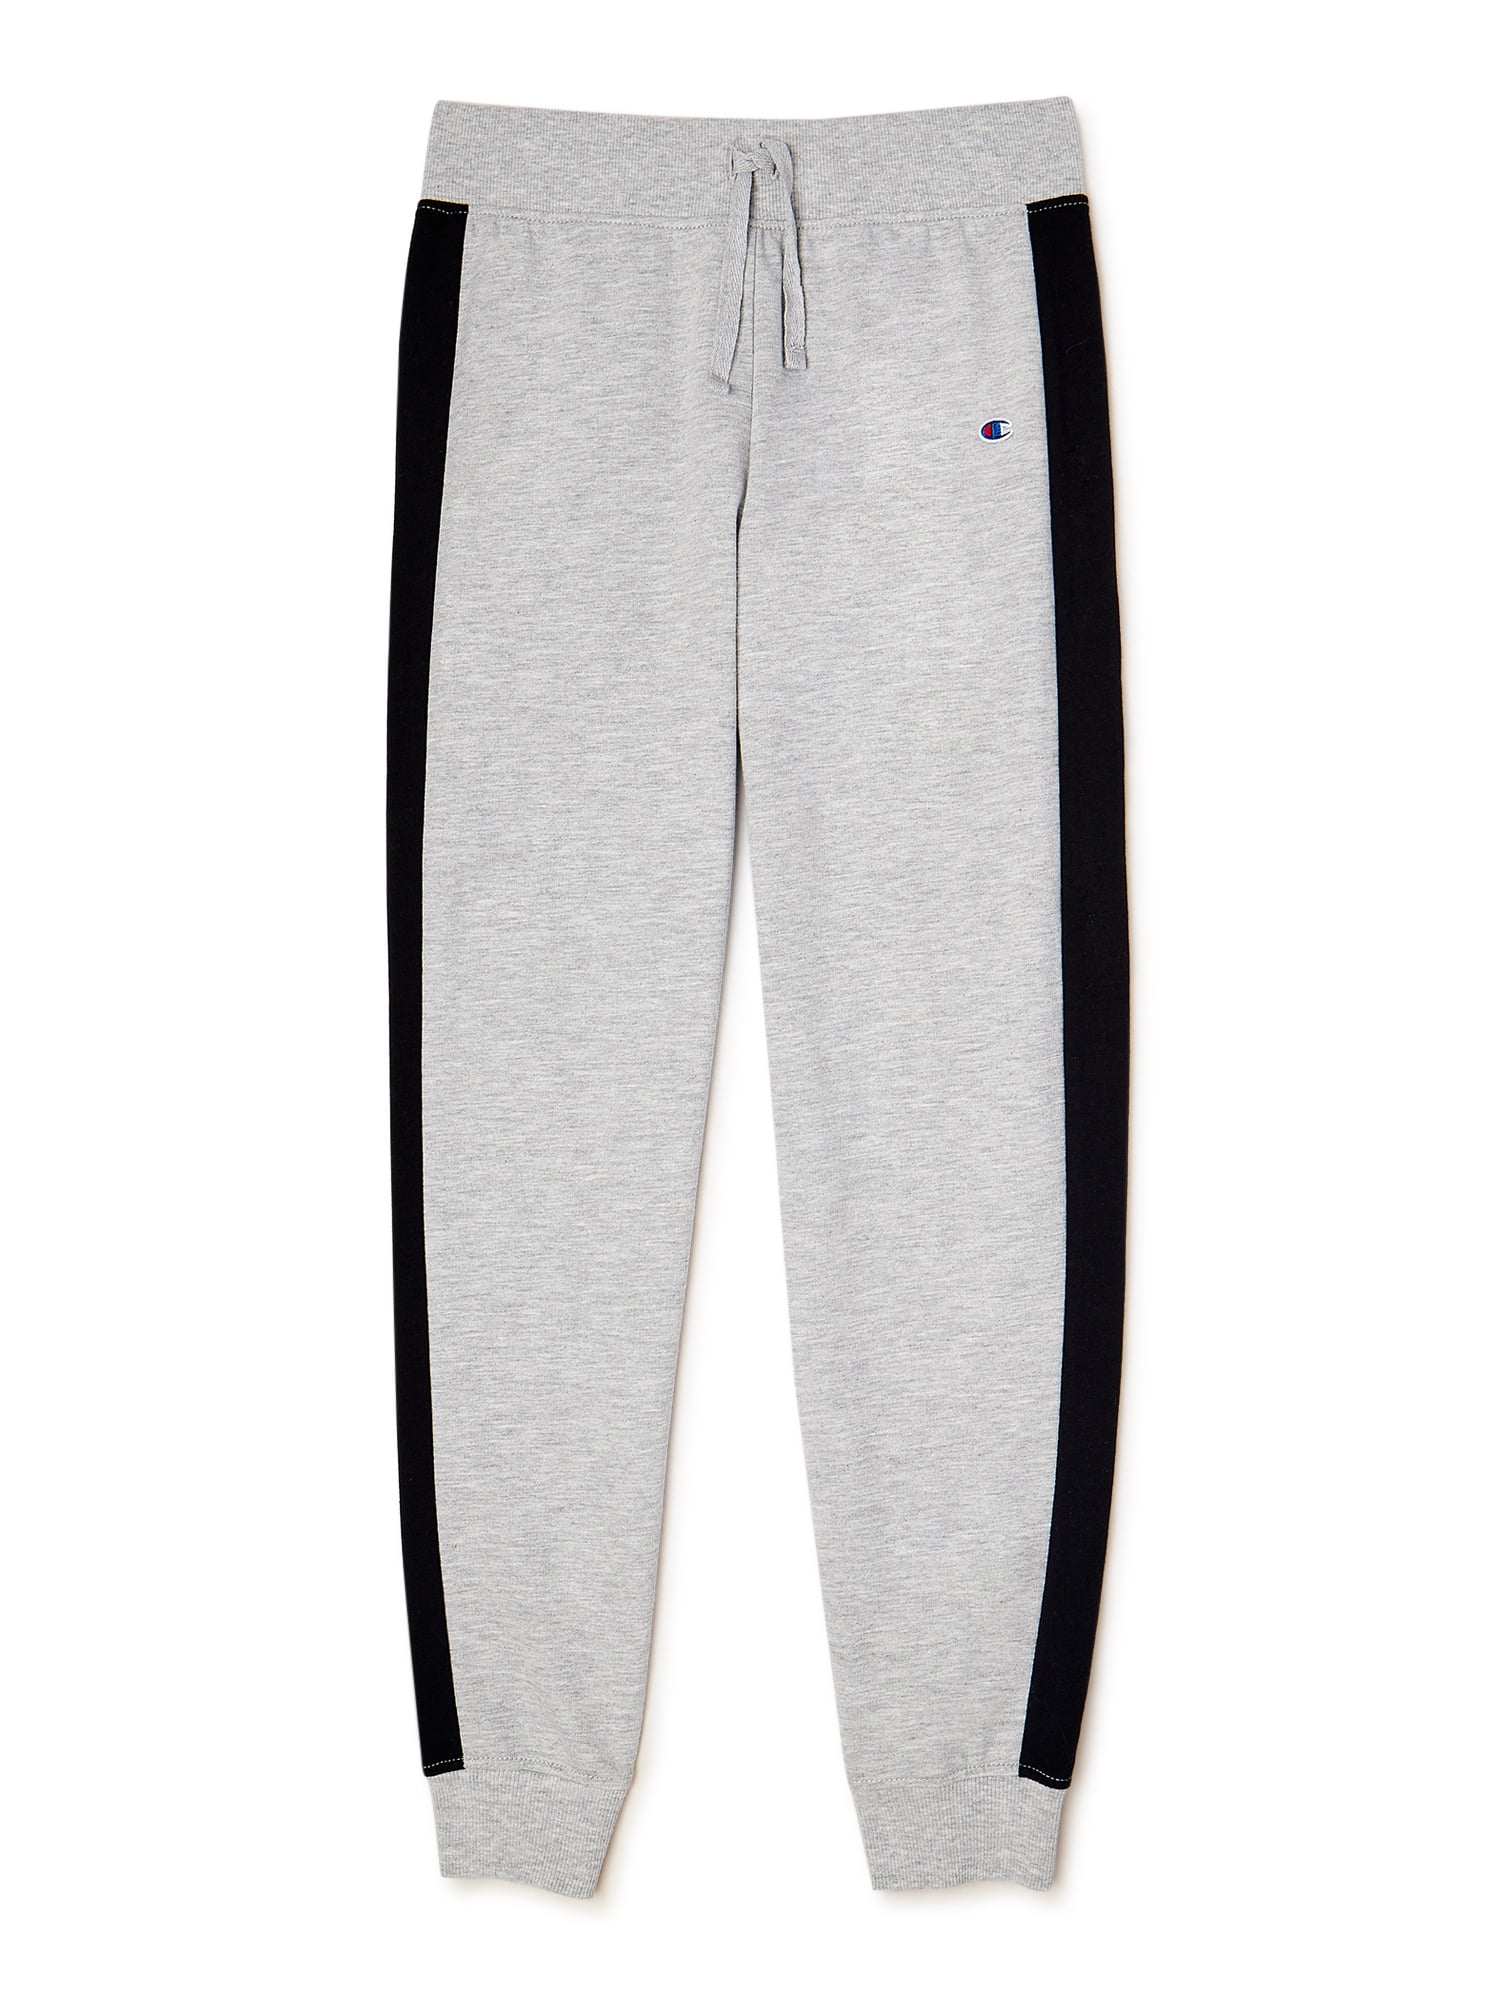 Champion Girls Side Taped French Terry Joggers, Sizes 7-16 - Walmart.com